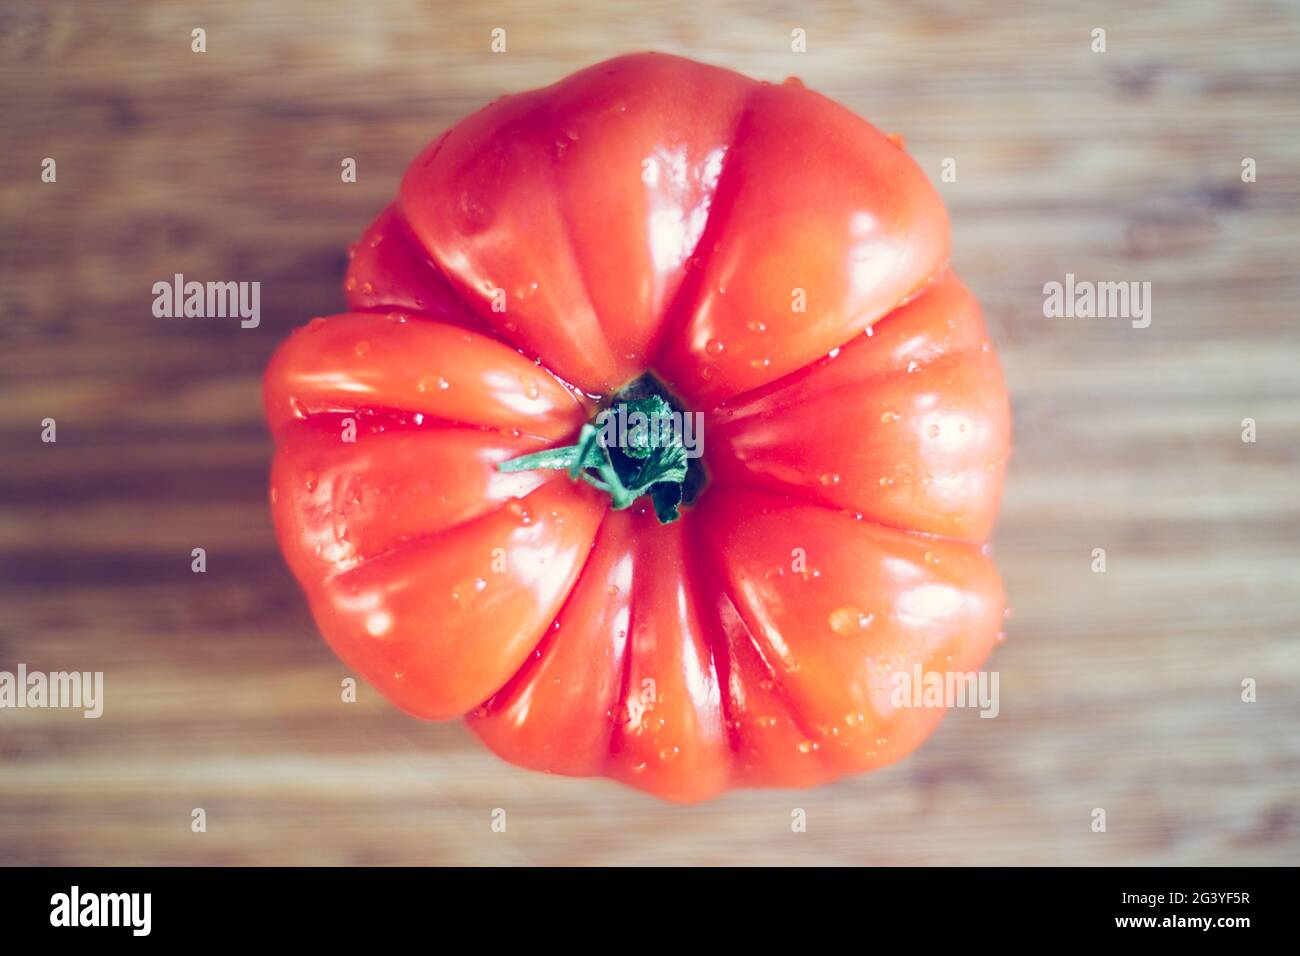 Oxheart tomatoes. Tomato on a bamboo wood plate. Stock Photo